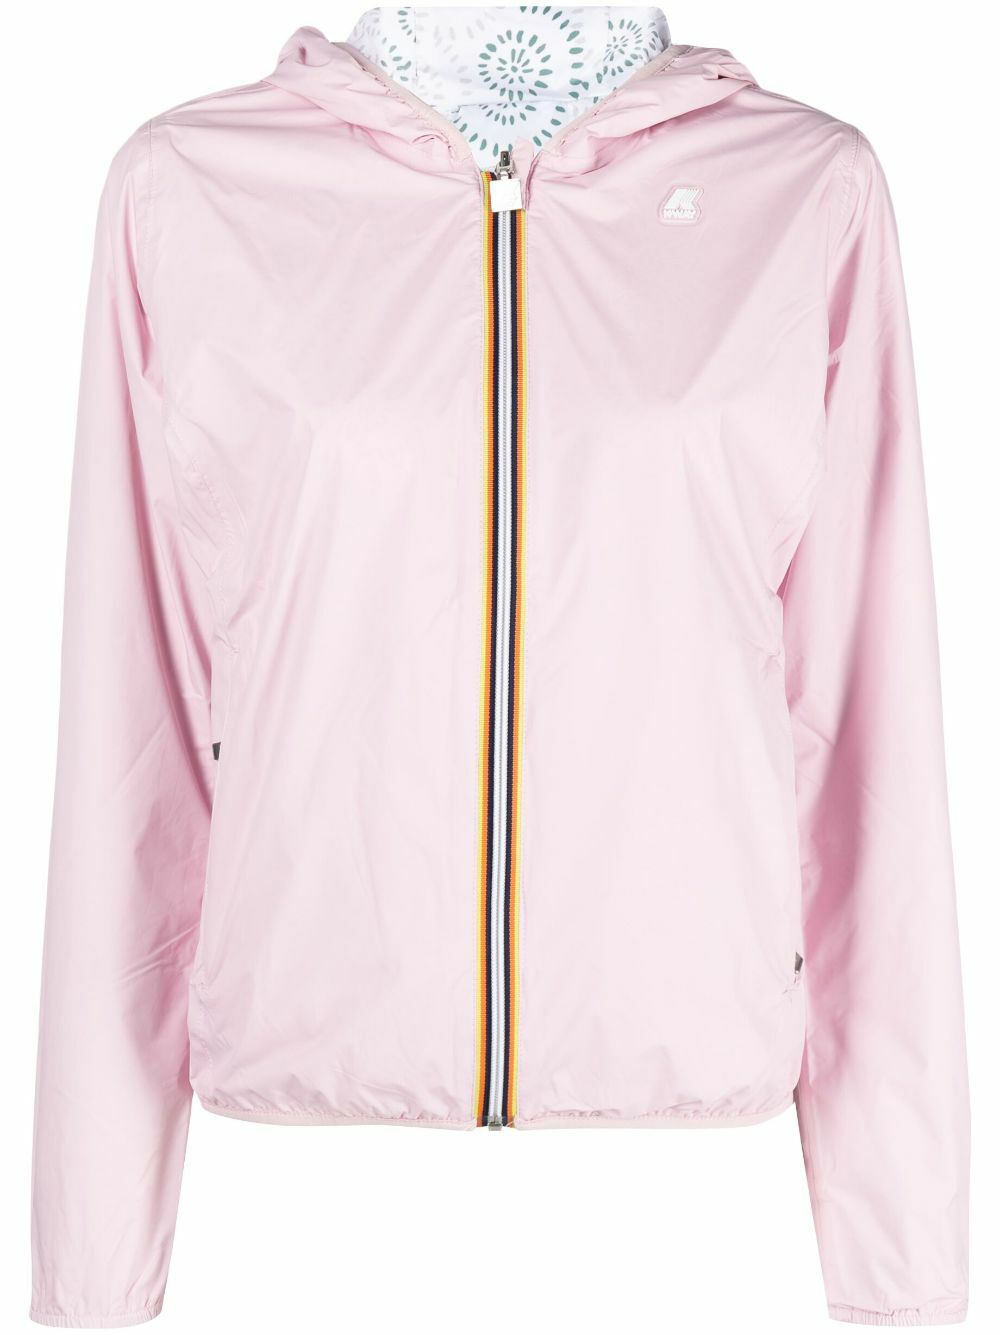 K-WAY - Lily Plus Double Graphic Jacket K-way